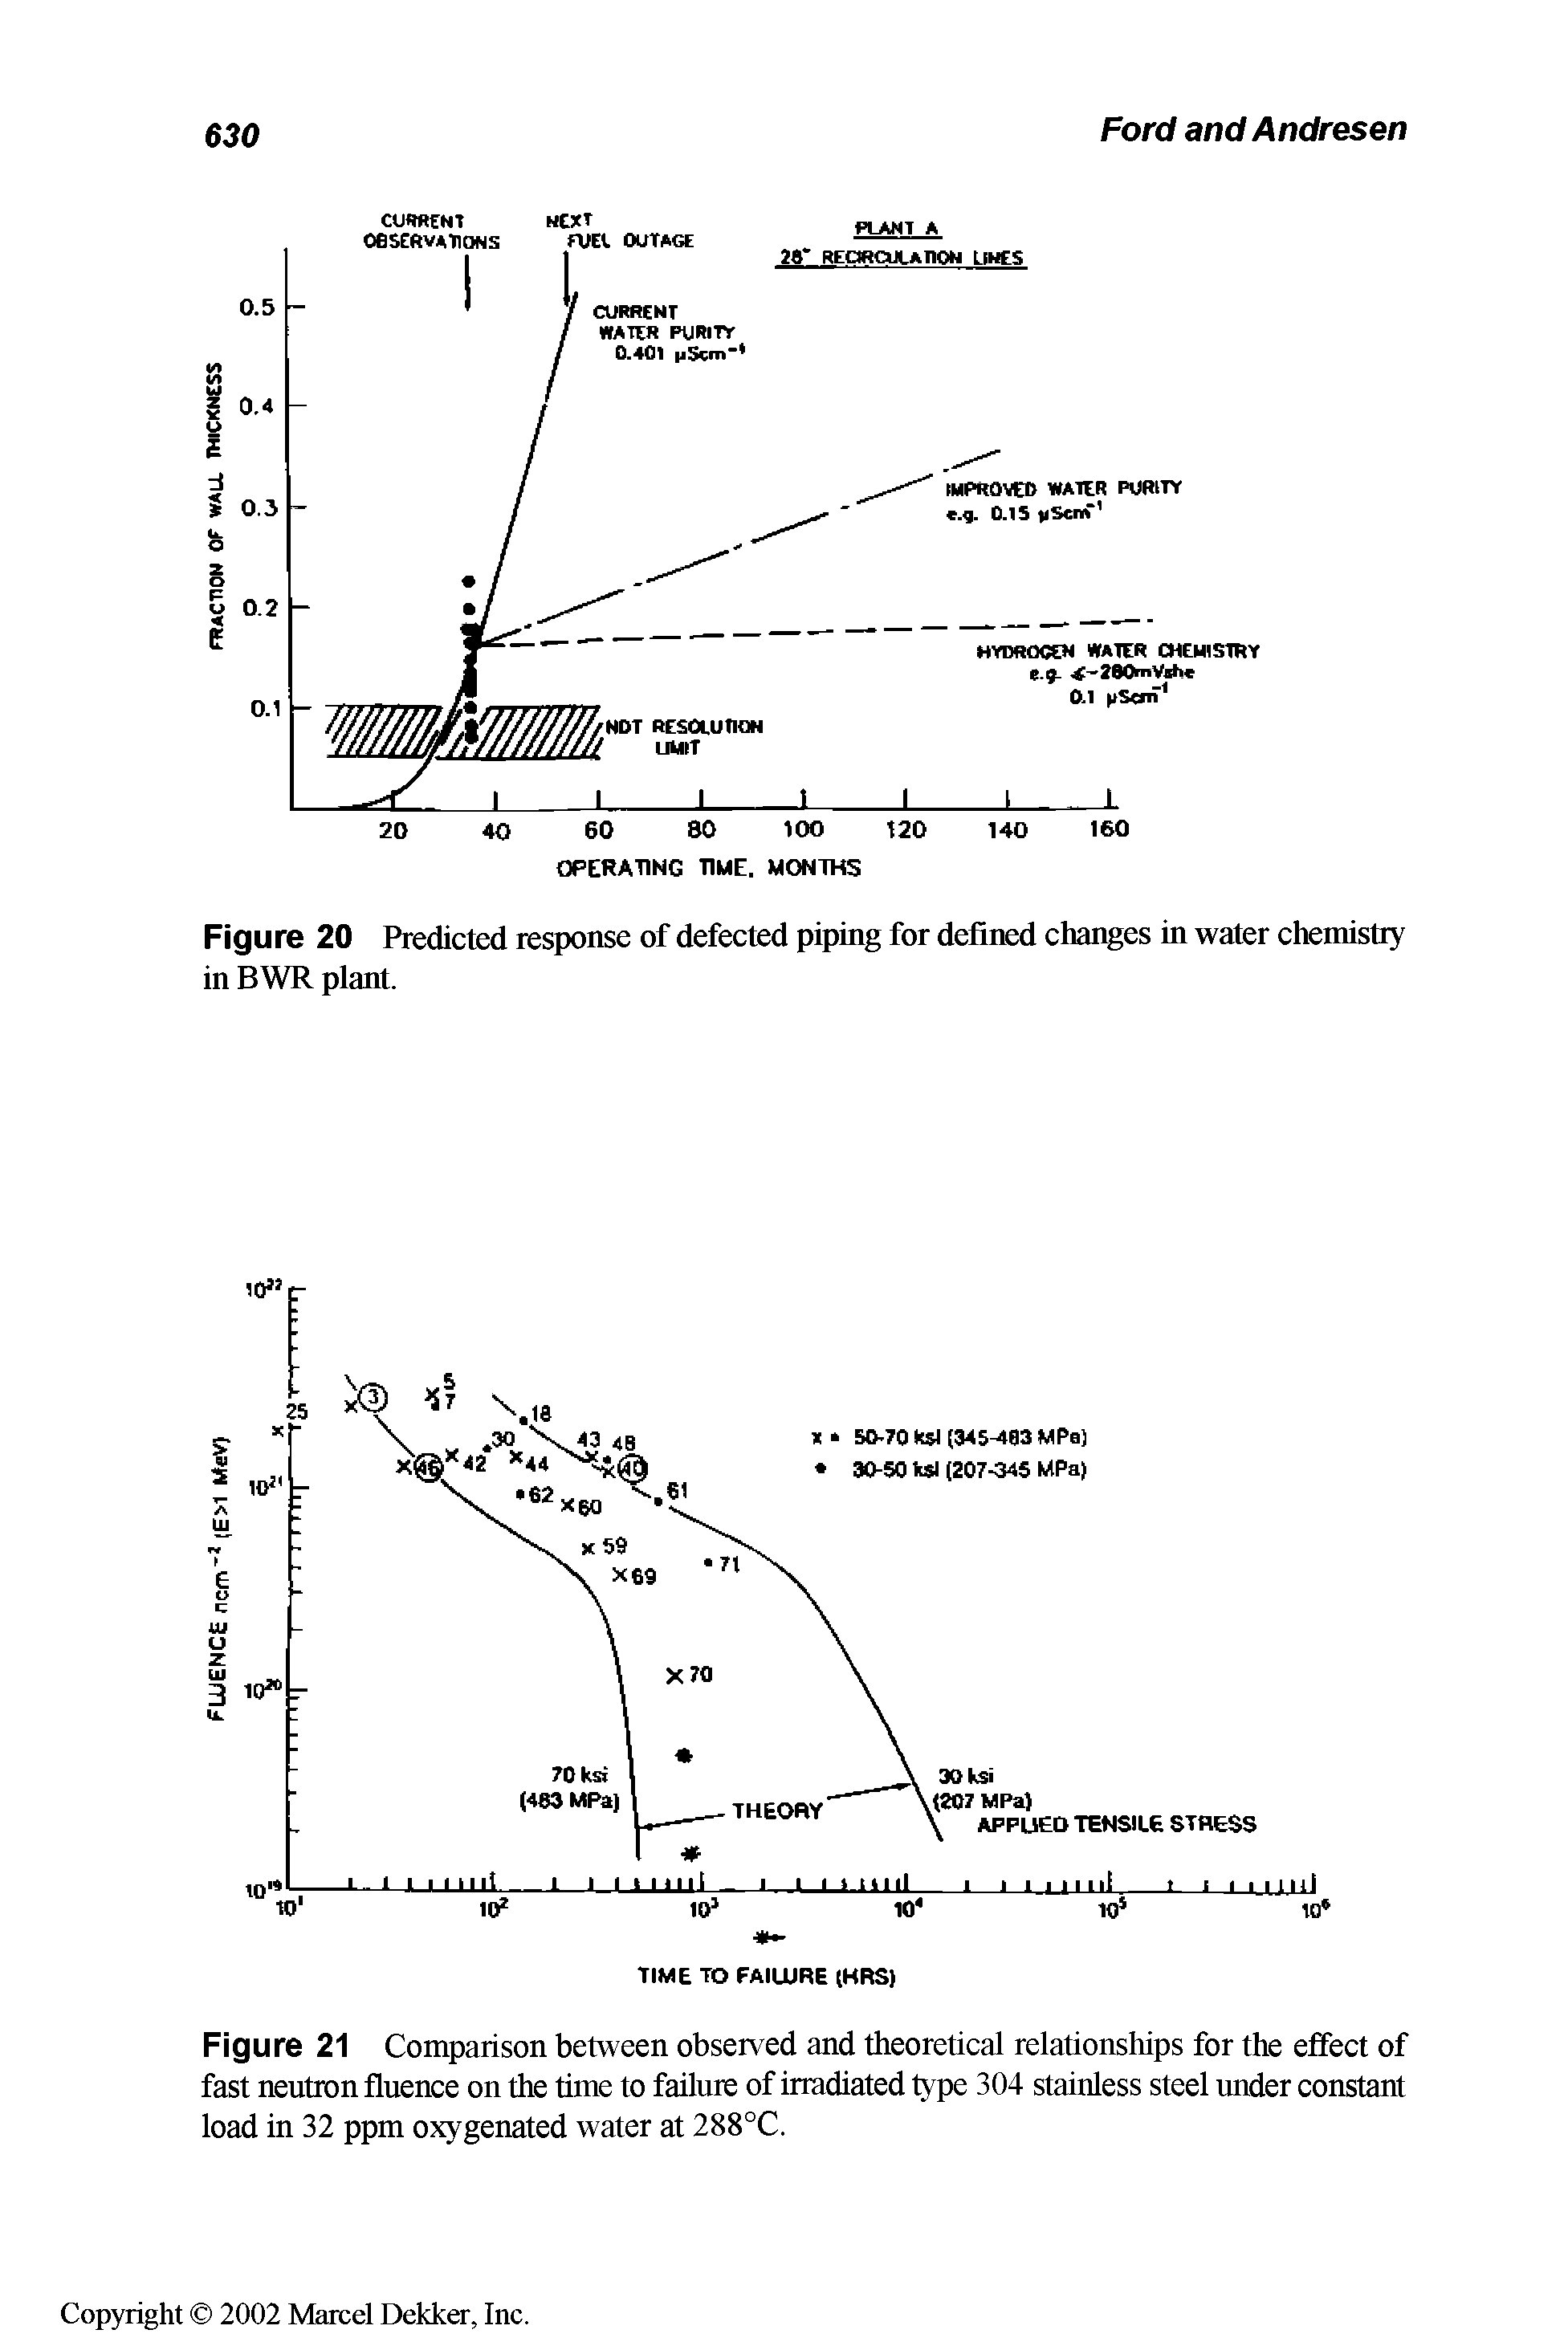 Figure 21 Comparison between observed and theoretical relationships for the effect of fast neutron fluence on the time to failure of irradiated type 304 stainless steel under constant load in 32 ppm oxygenated water at 288°C.